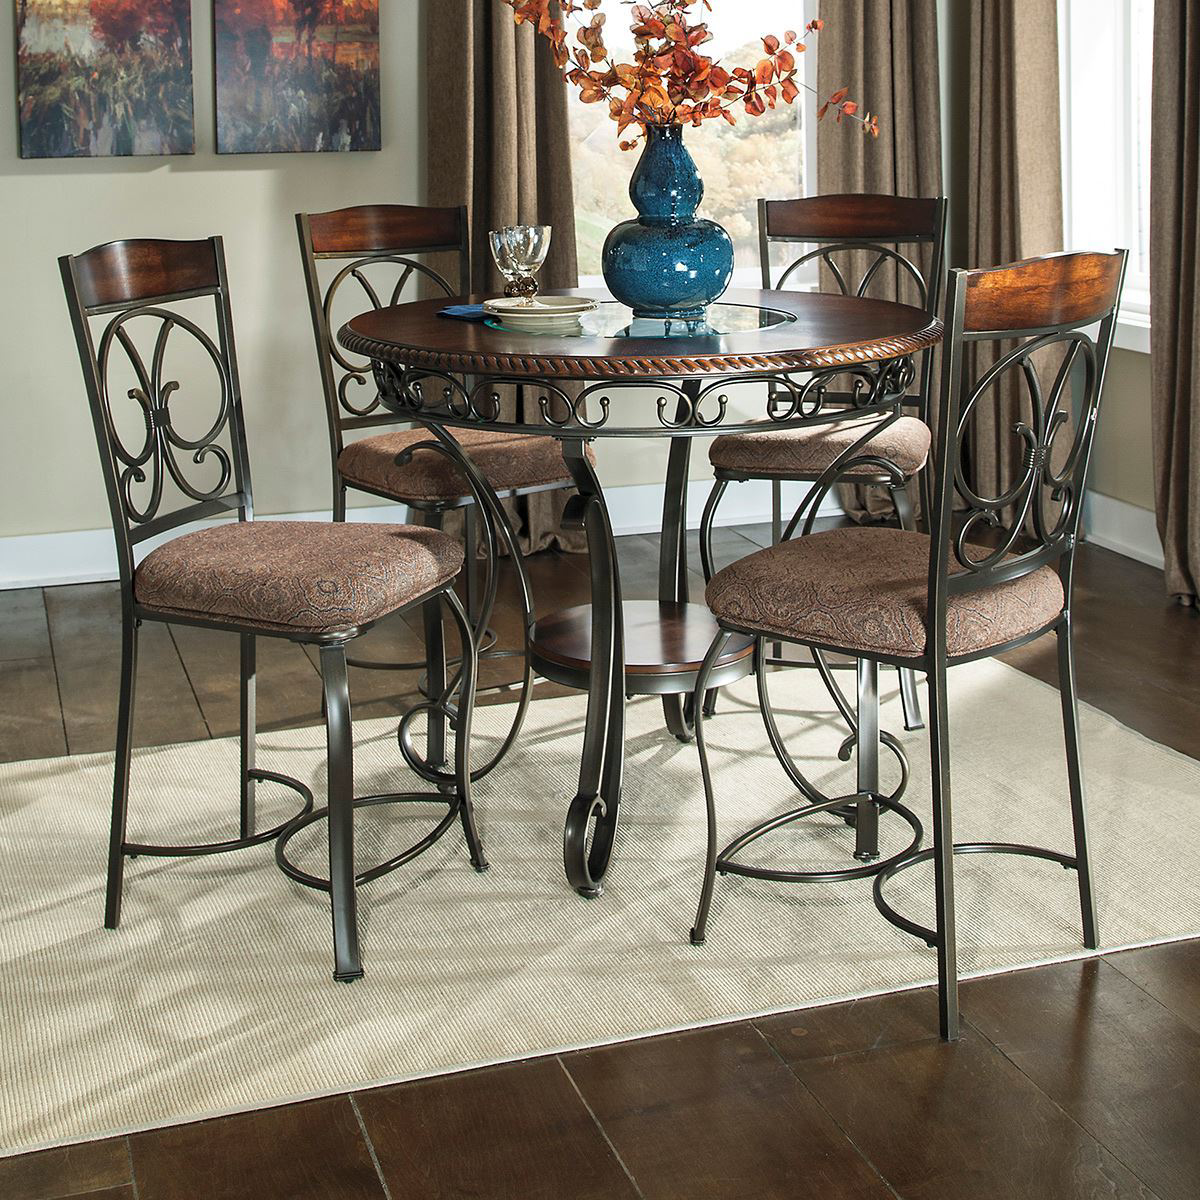 Picture of The Vinci 24 in. Upholstered Barstool